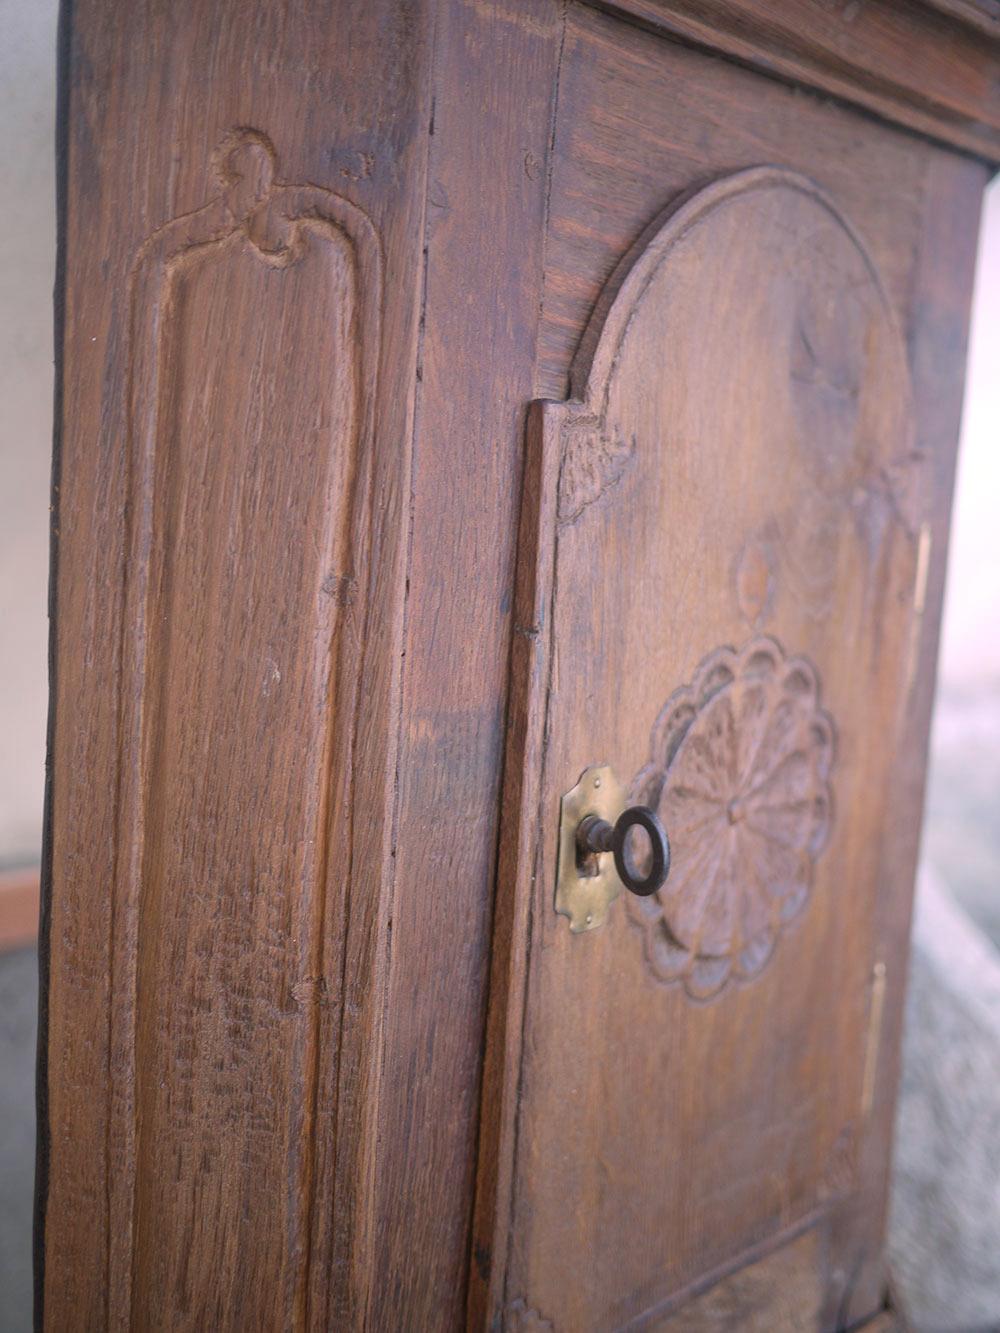 Angular hanging cabinet of 1700 in oak

Measures: H.78 - L. 48 - P. 28

Particular cabinet entirely built in oak wood, with a corner door.
A rose window is carved on the door, and the whole lower part is pleasantly shaped and carved.
The small